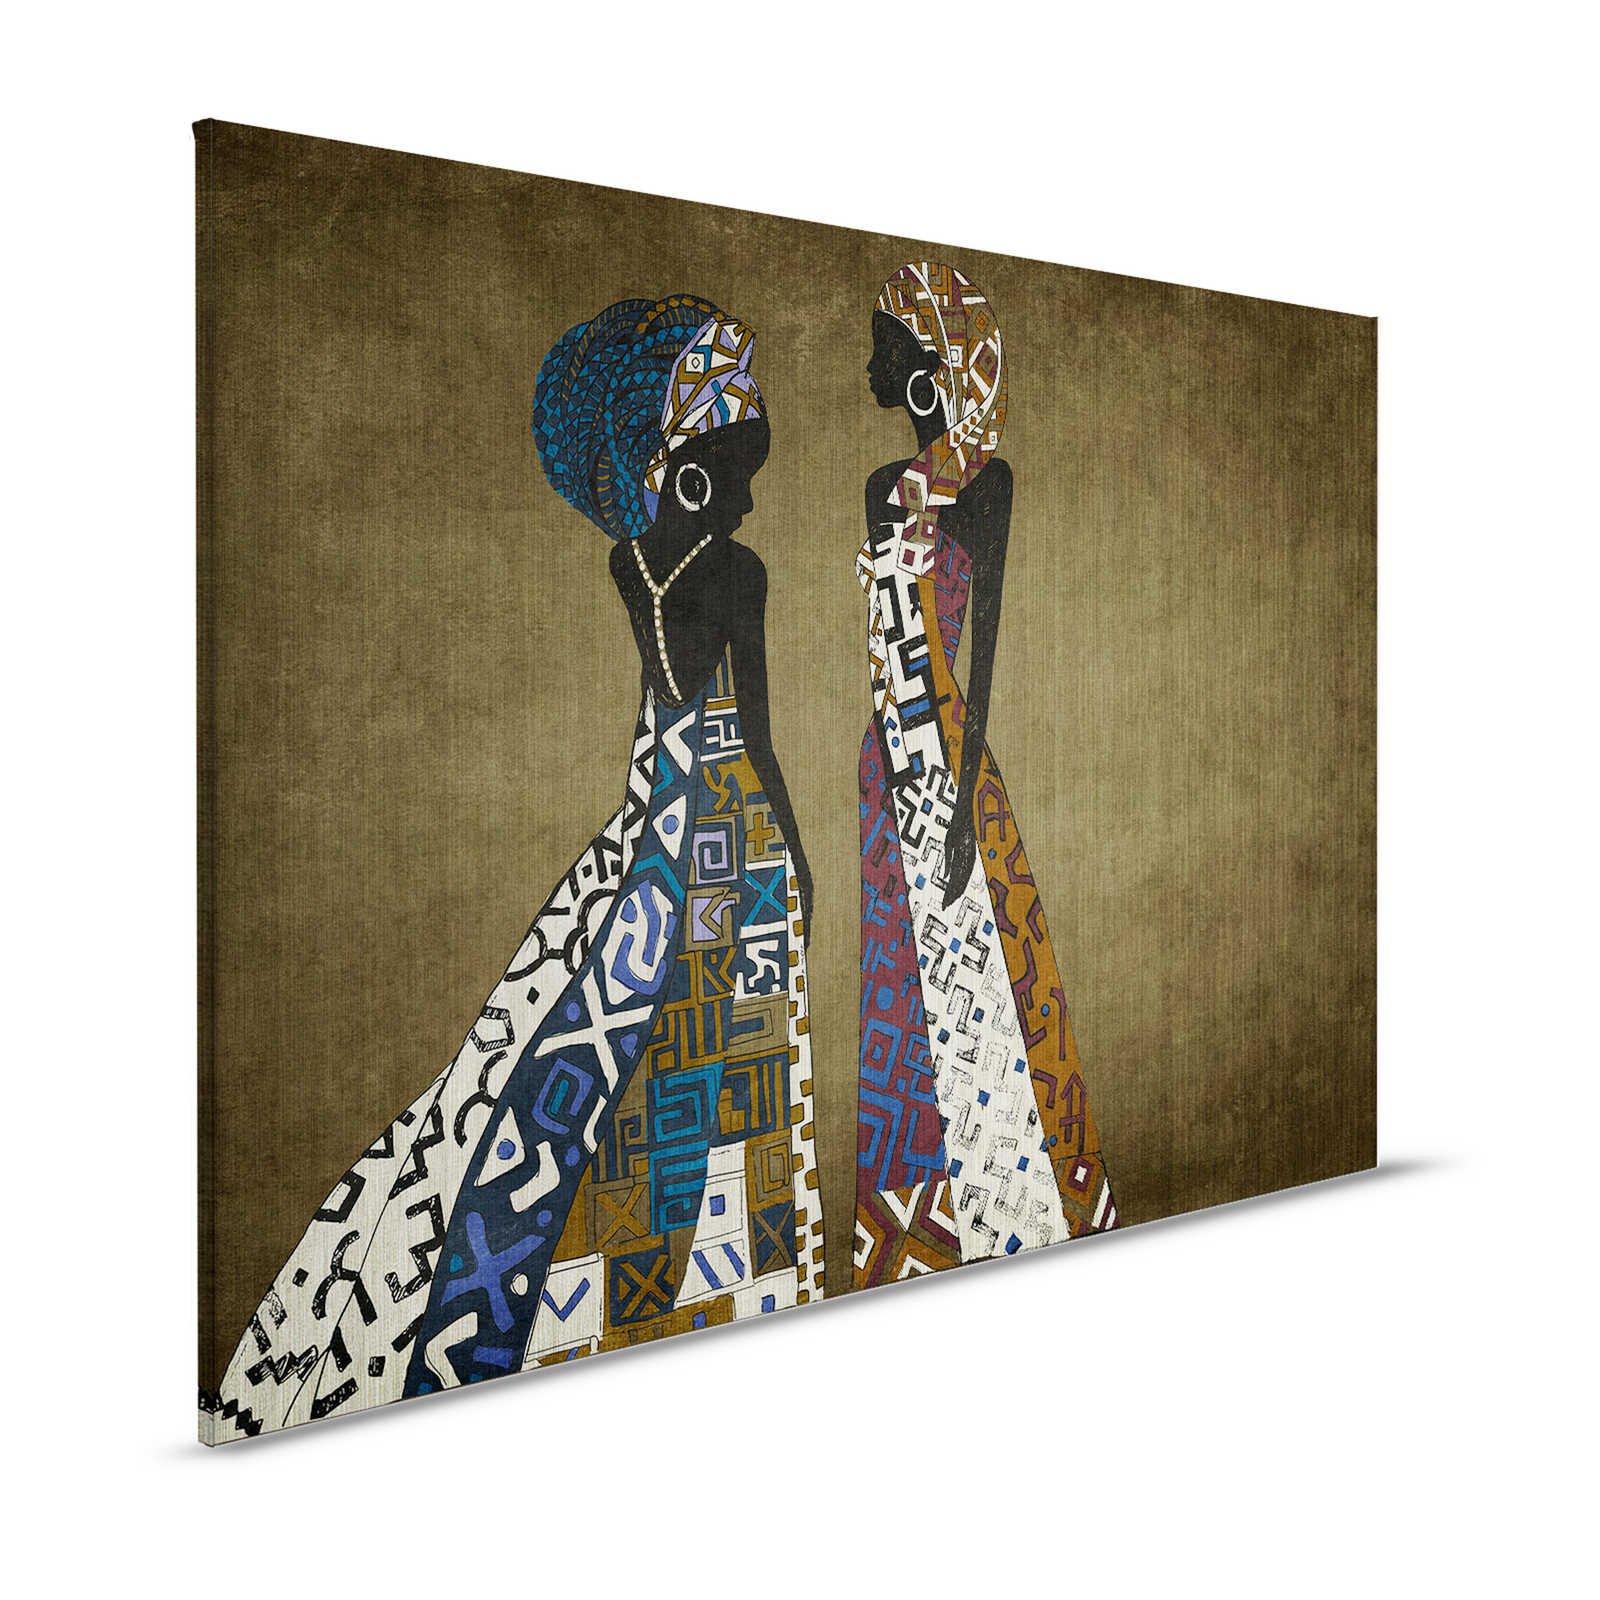 Nairobi 3 - Africa Canvas painting Dress Design with Ethno Pattern - 1,20 m x 0,80 m
